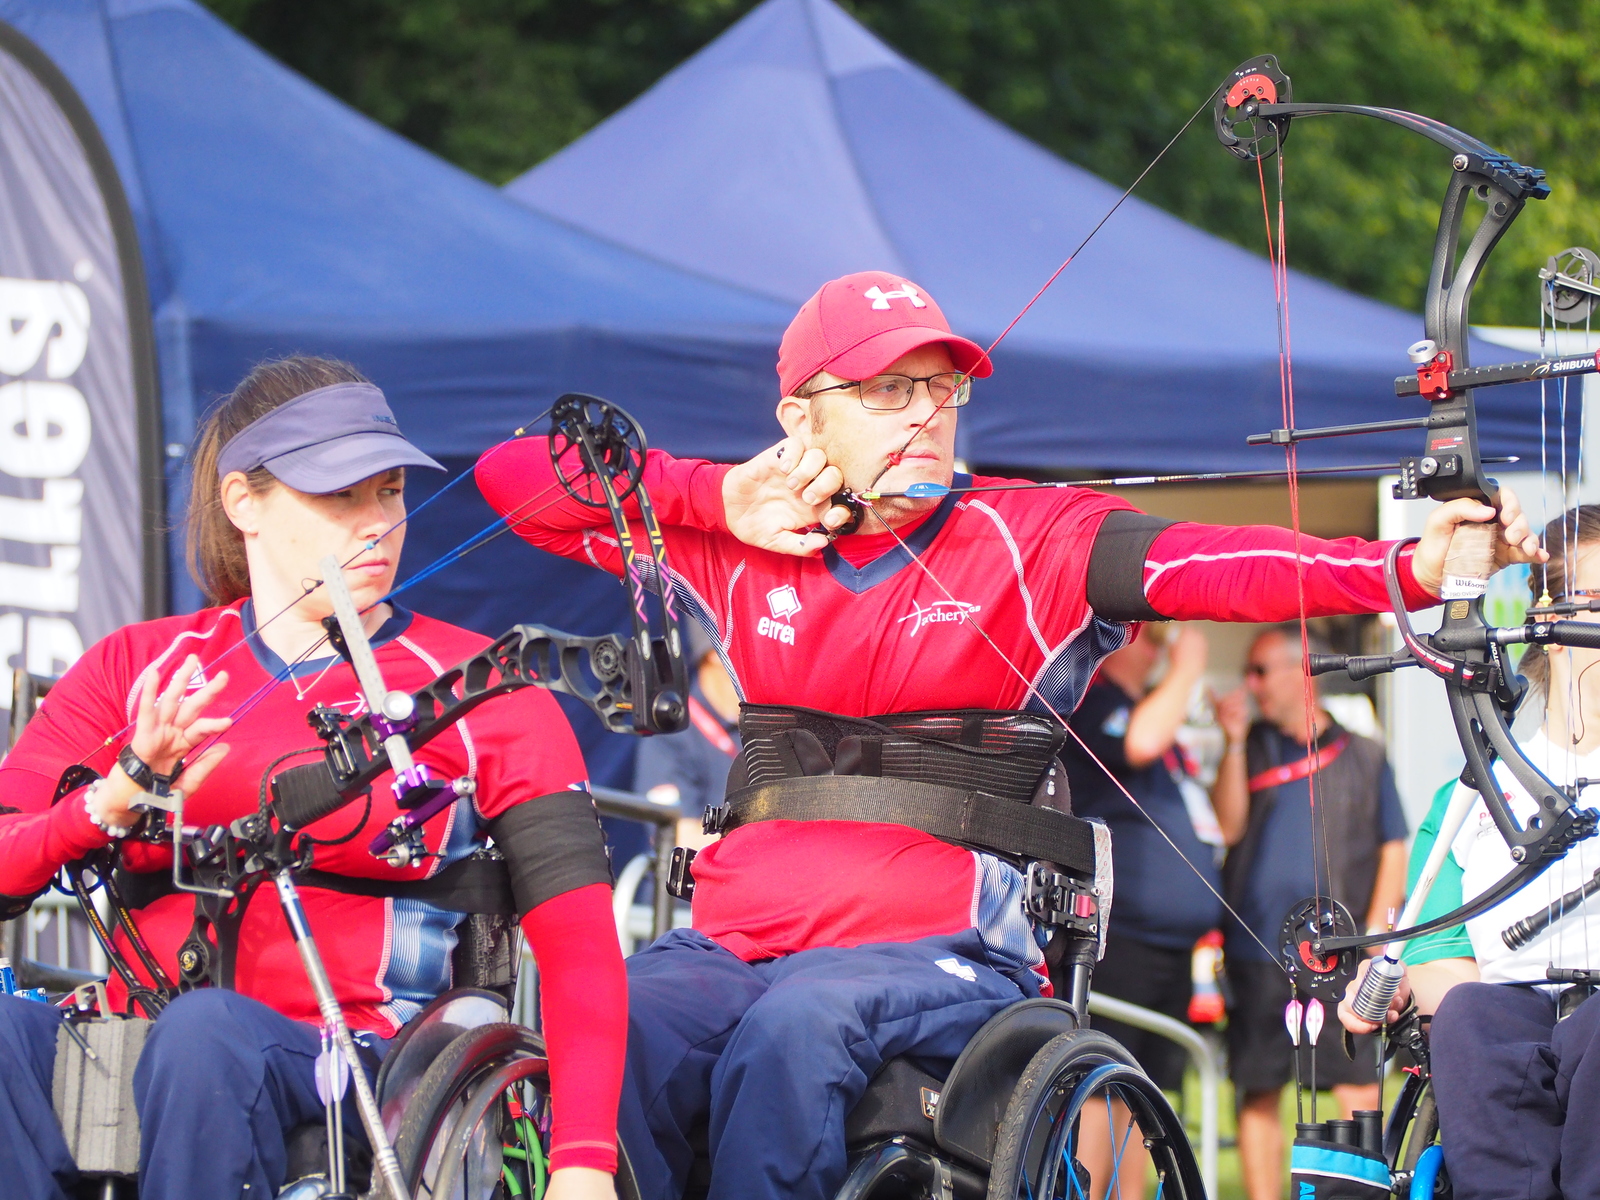 Victoria Kingstone and Martin Saych at the European Para Cup